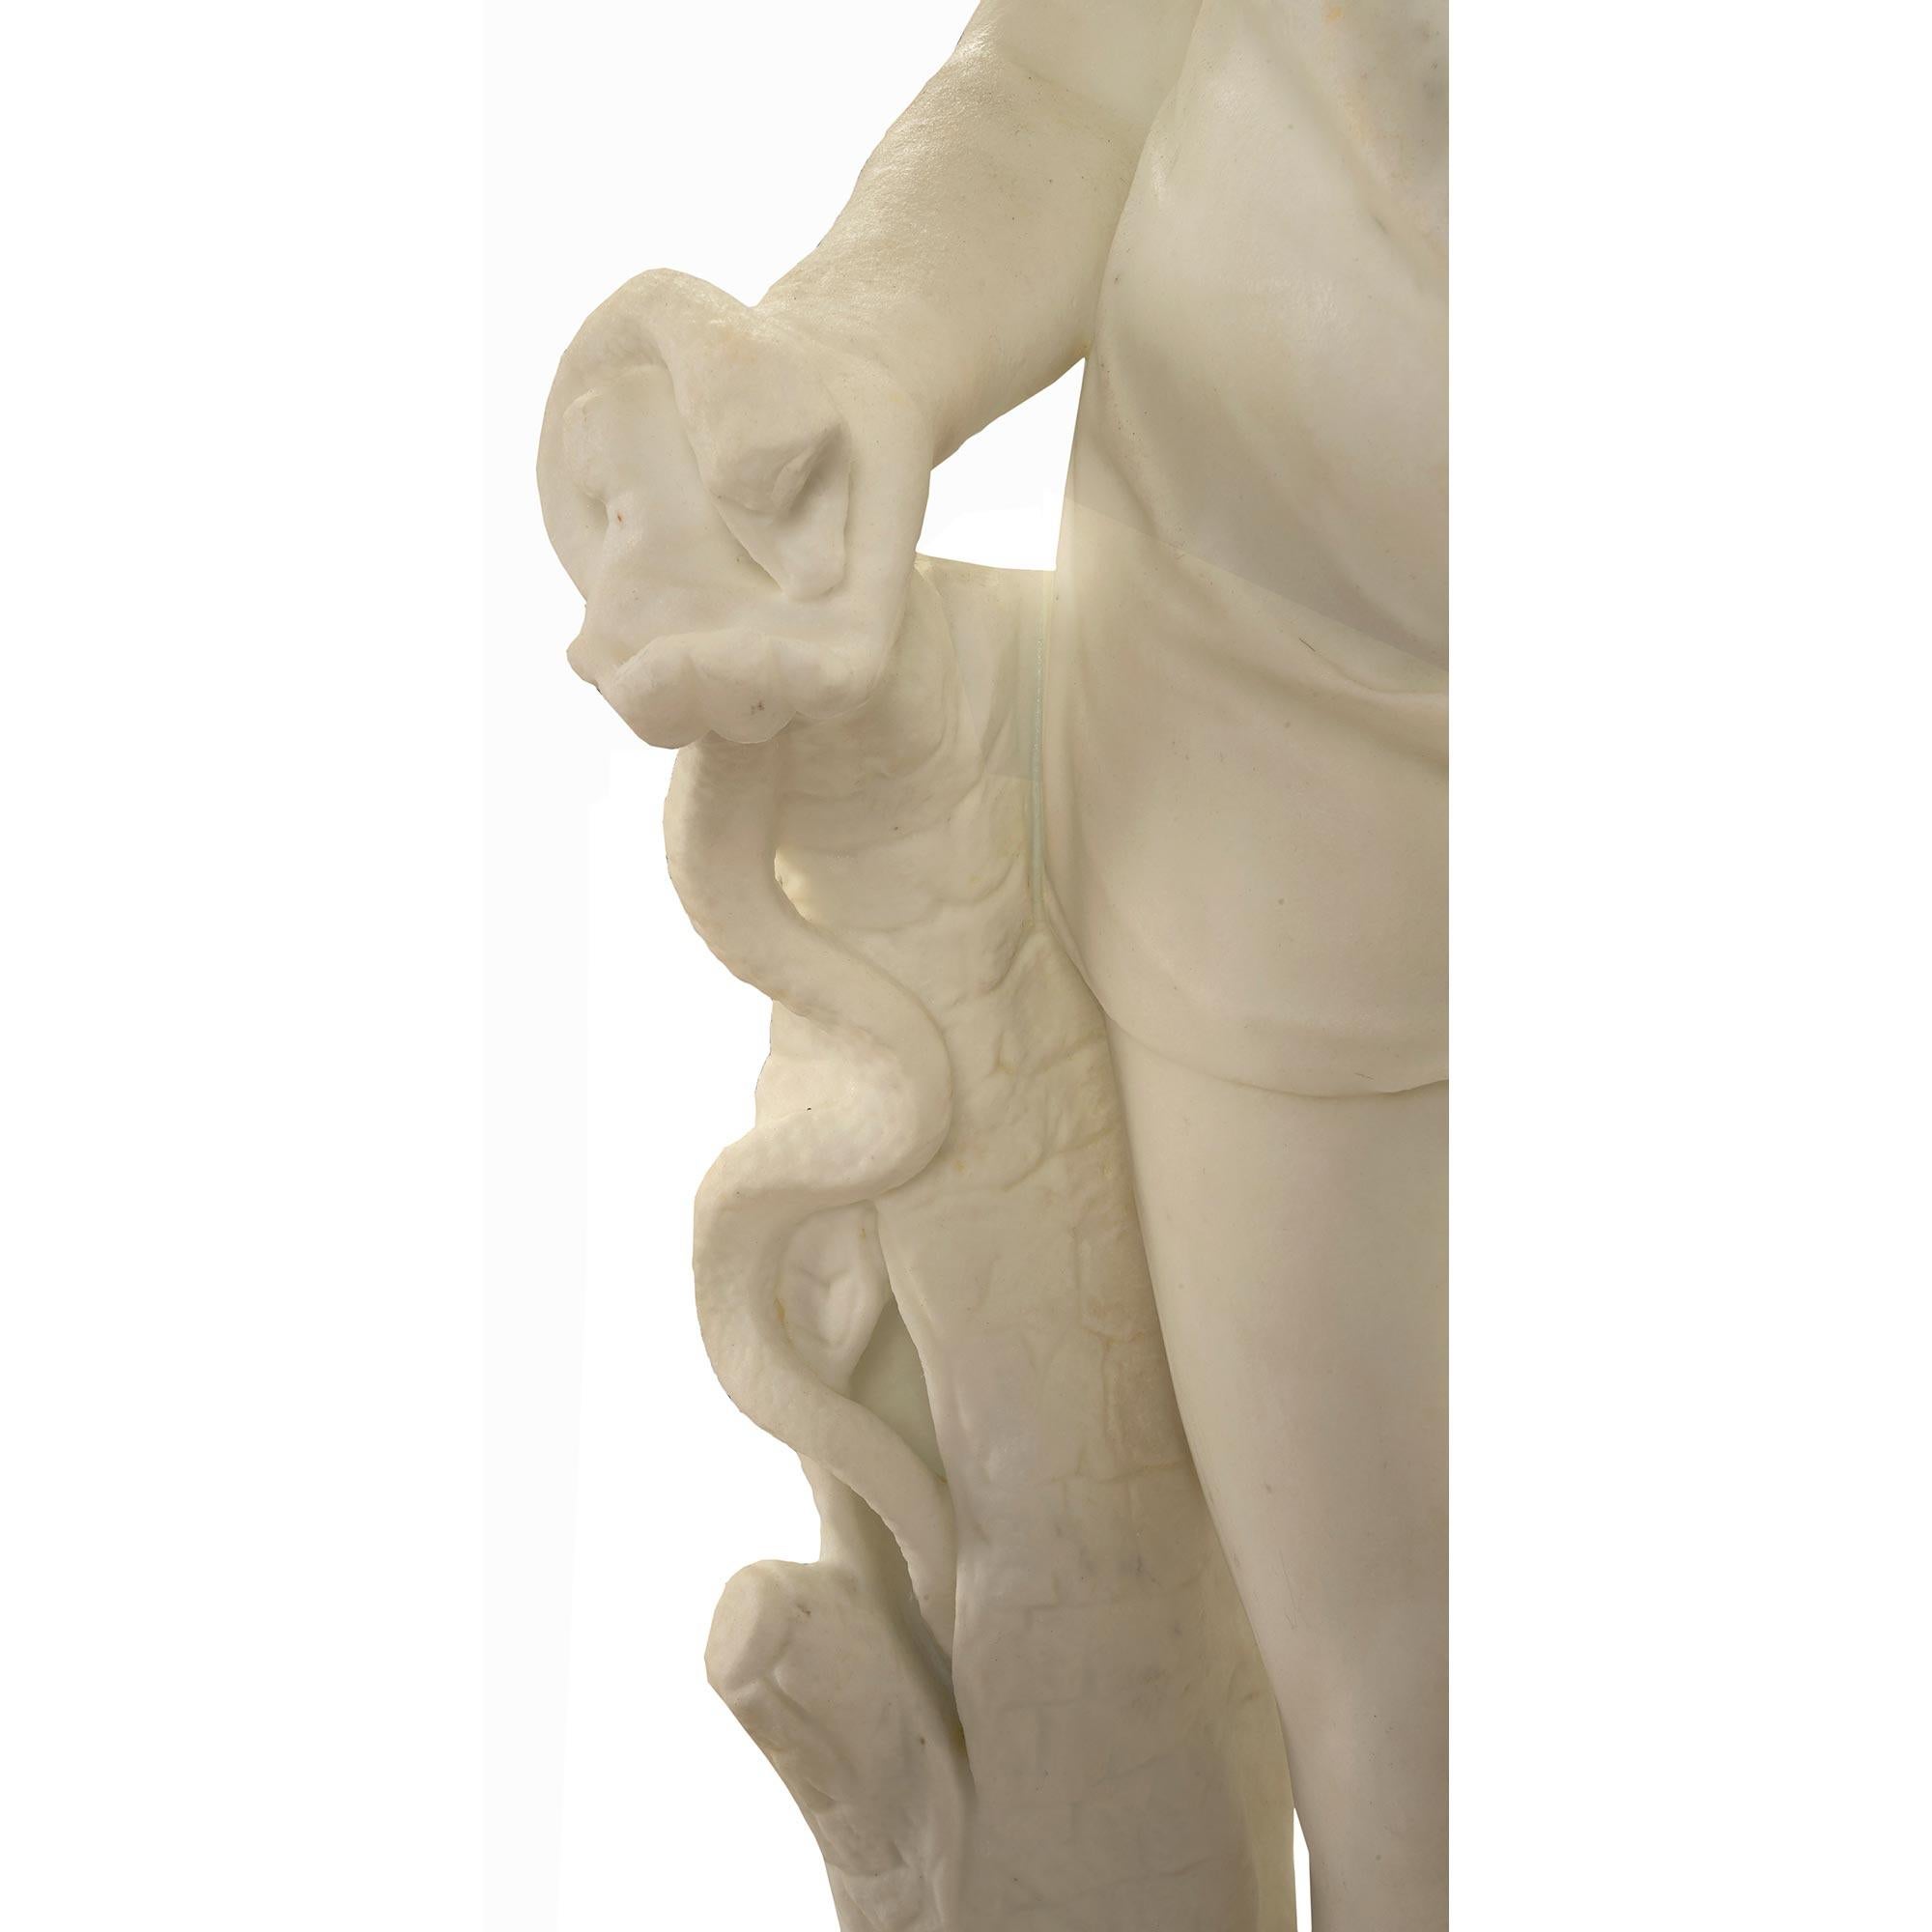 Italian 19th Century White Carrara Marble Statue of a Young Girl and Serpent For Sale 6